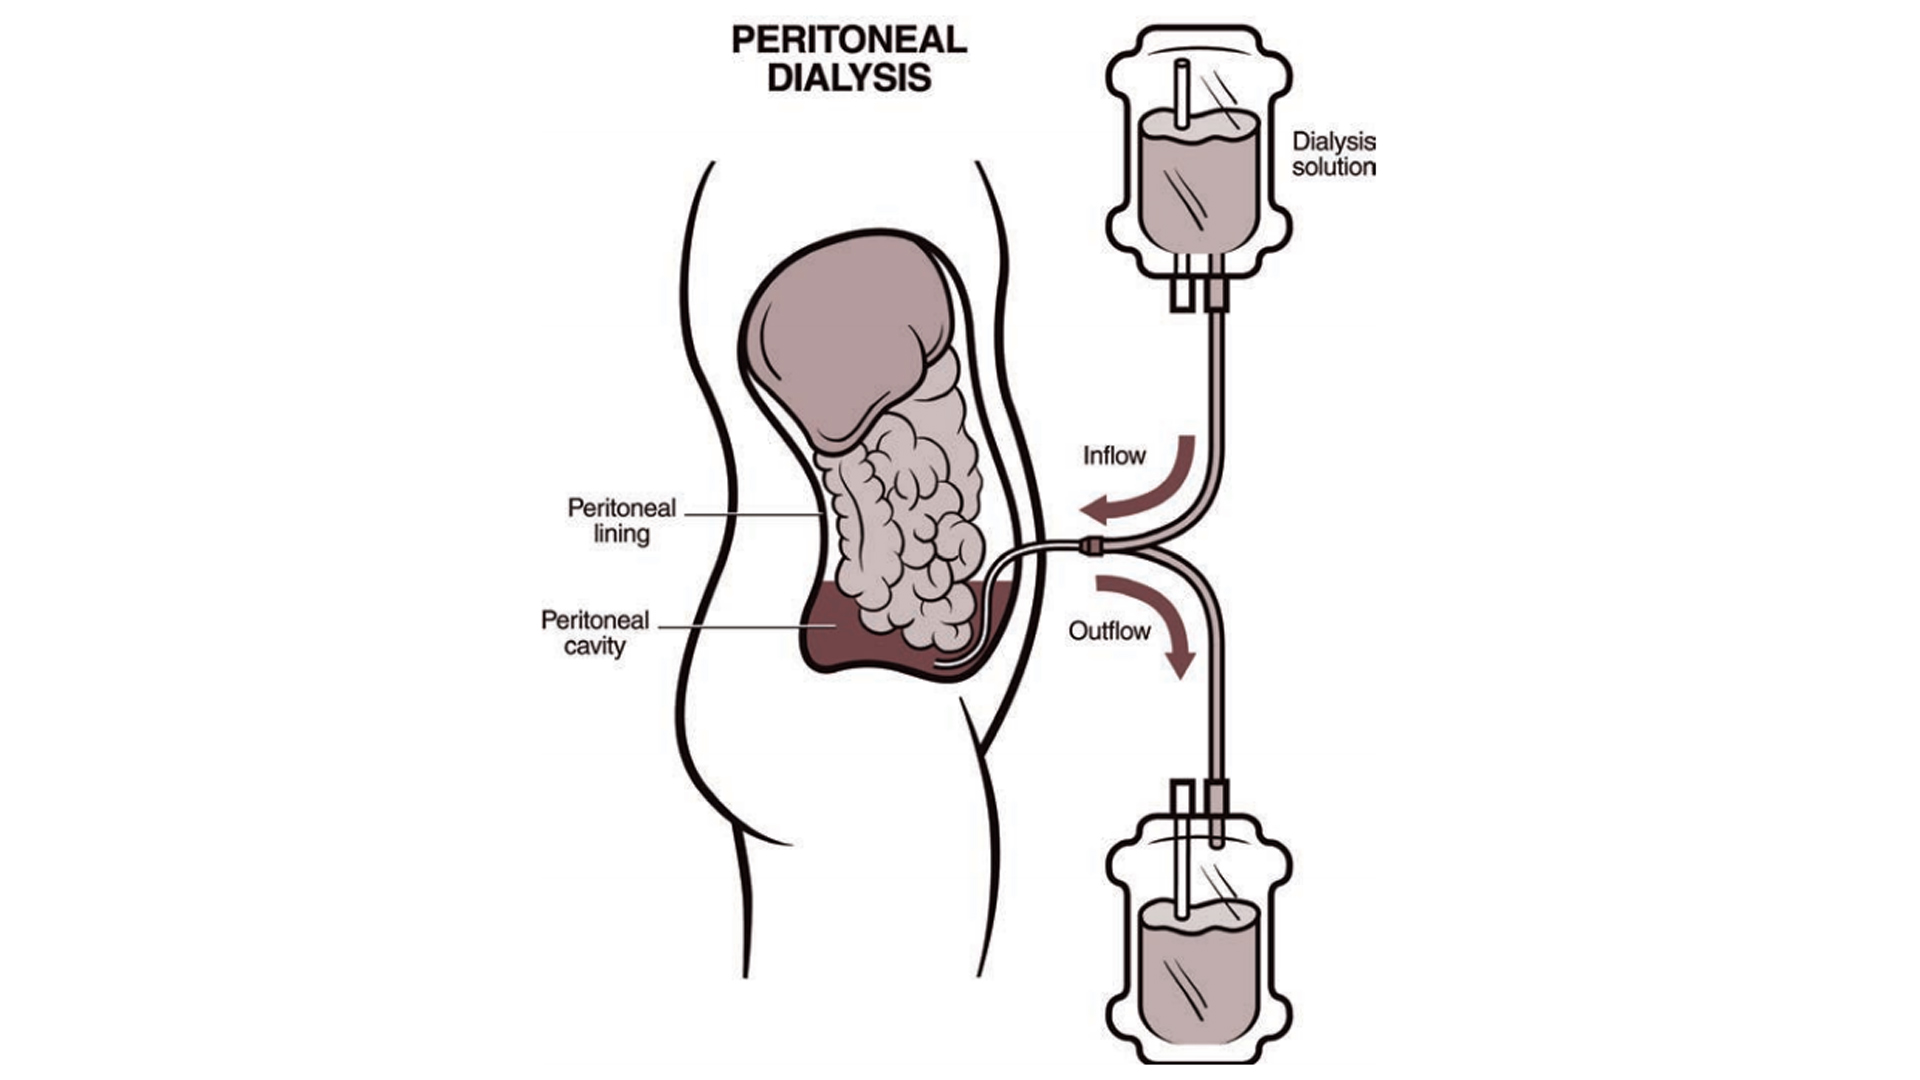 easy-and-affordable-access-to-peritoneal-dialysis-under-pmndp